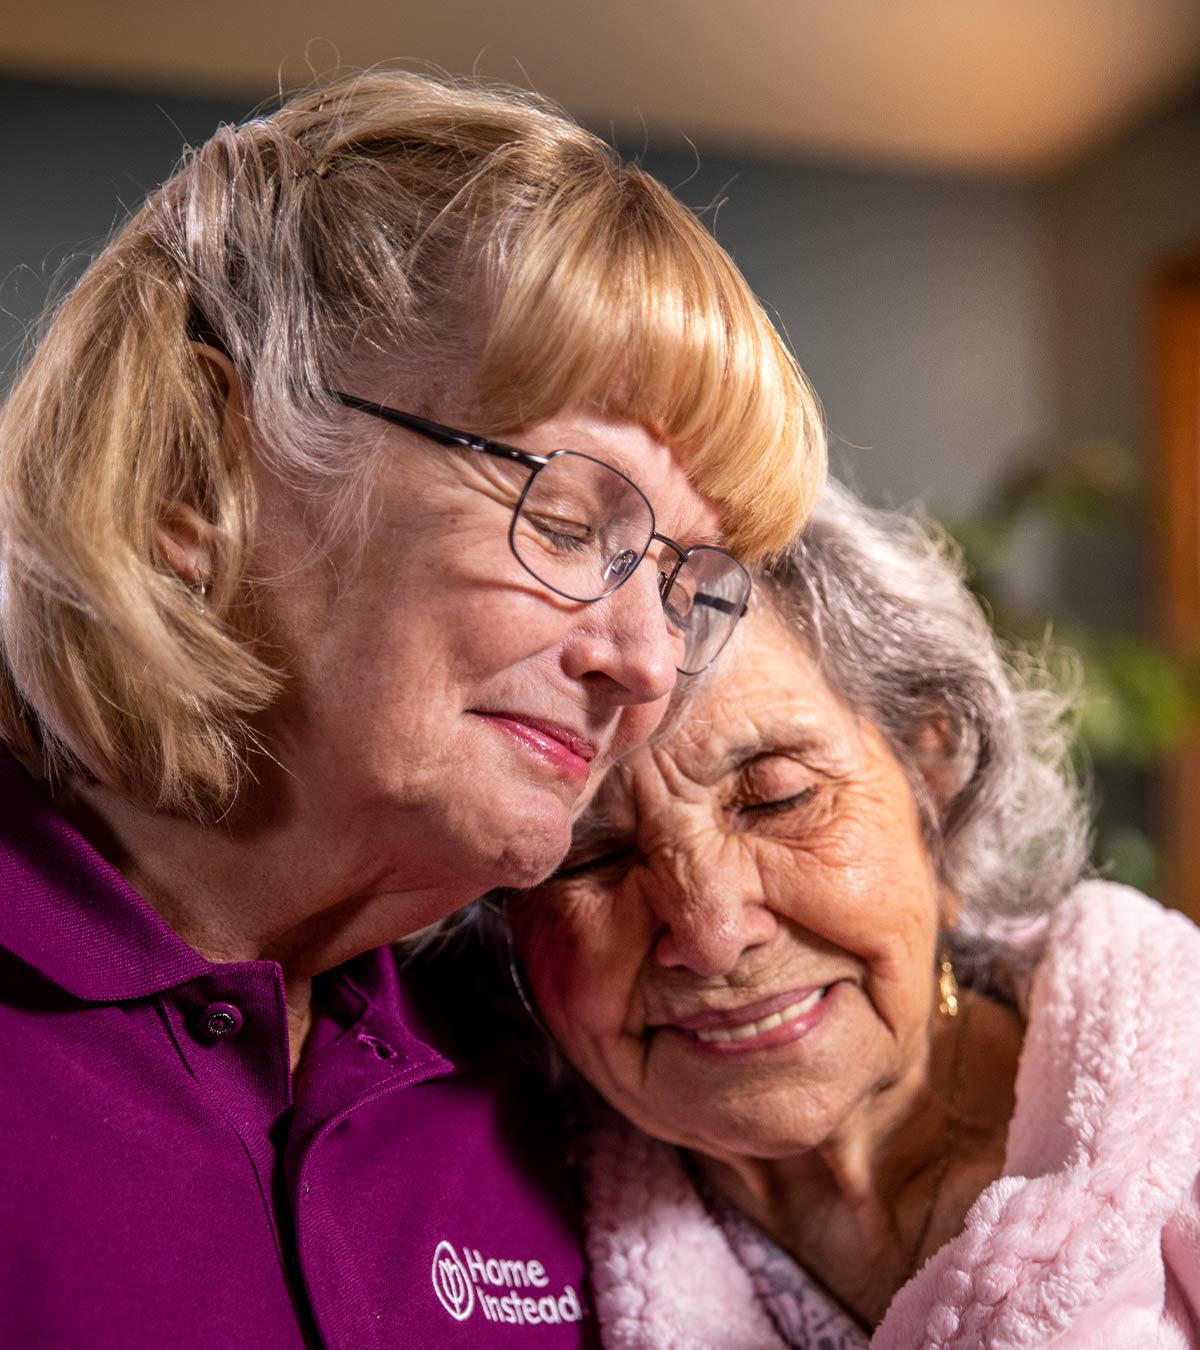 CAREGiver providing in-home senior care services. Home Instead of Grayslake, IL provides Elder Care to aging adults. 